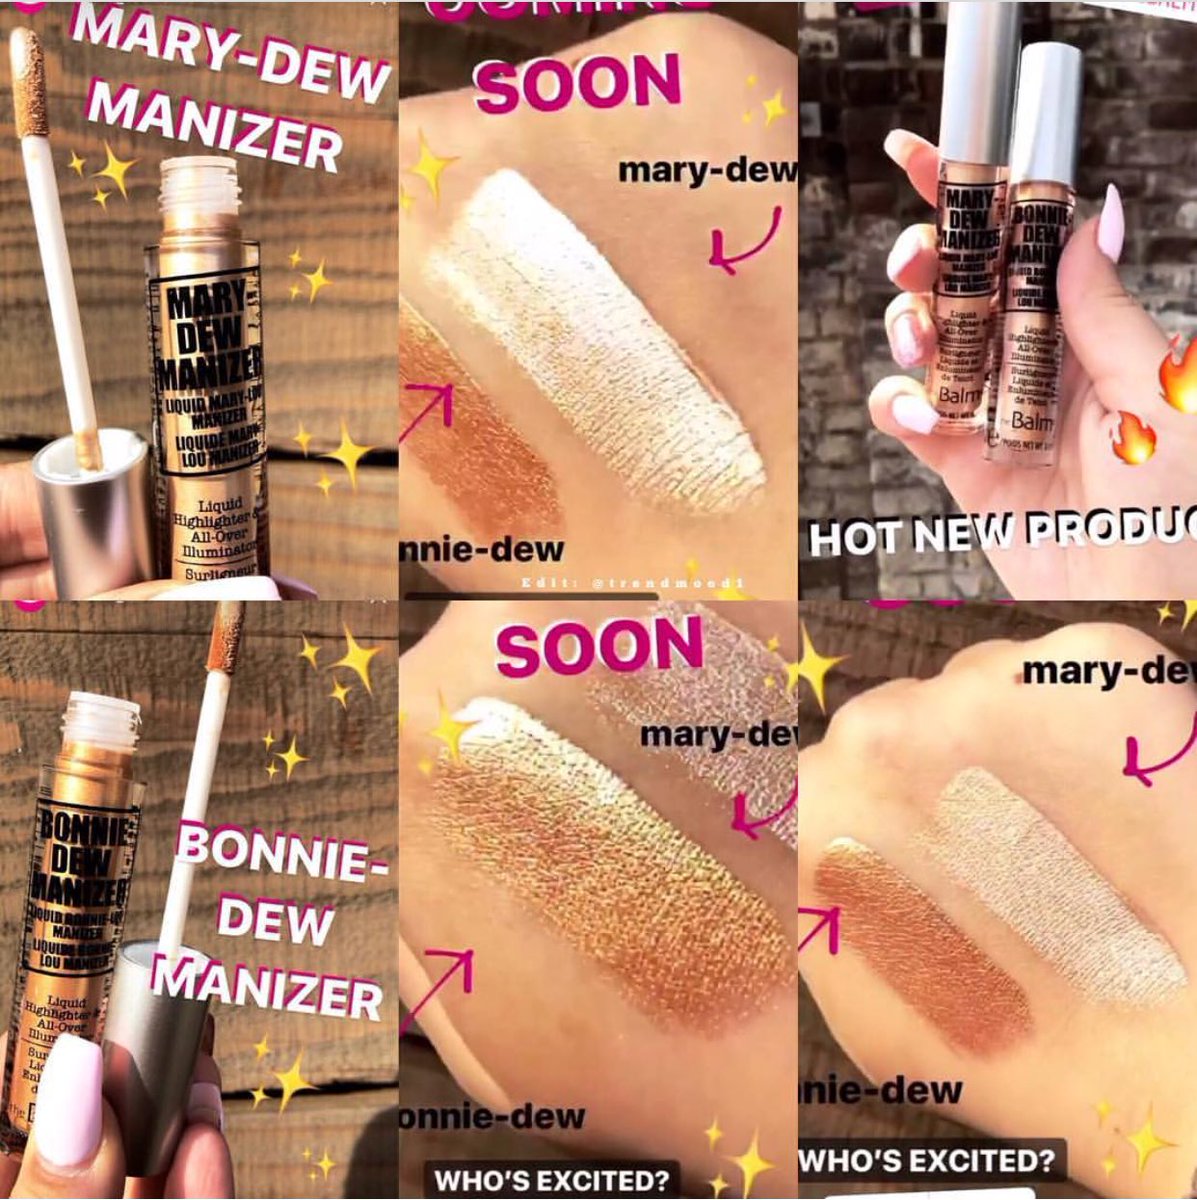 Trendmood on Twitter: "#SWATCHES New Addition to the family ✨ #Dews #Liquid #Highlighters ✨🙀😍 in our favorite shades!!! ✨ Mary- Dew Manizer ✨ Bonnie - Dew Manizer #ComingSoon / Twitter